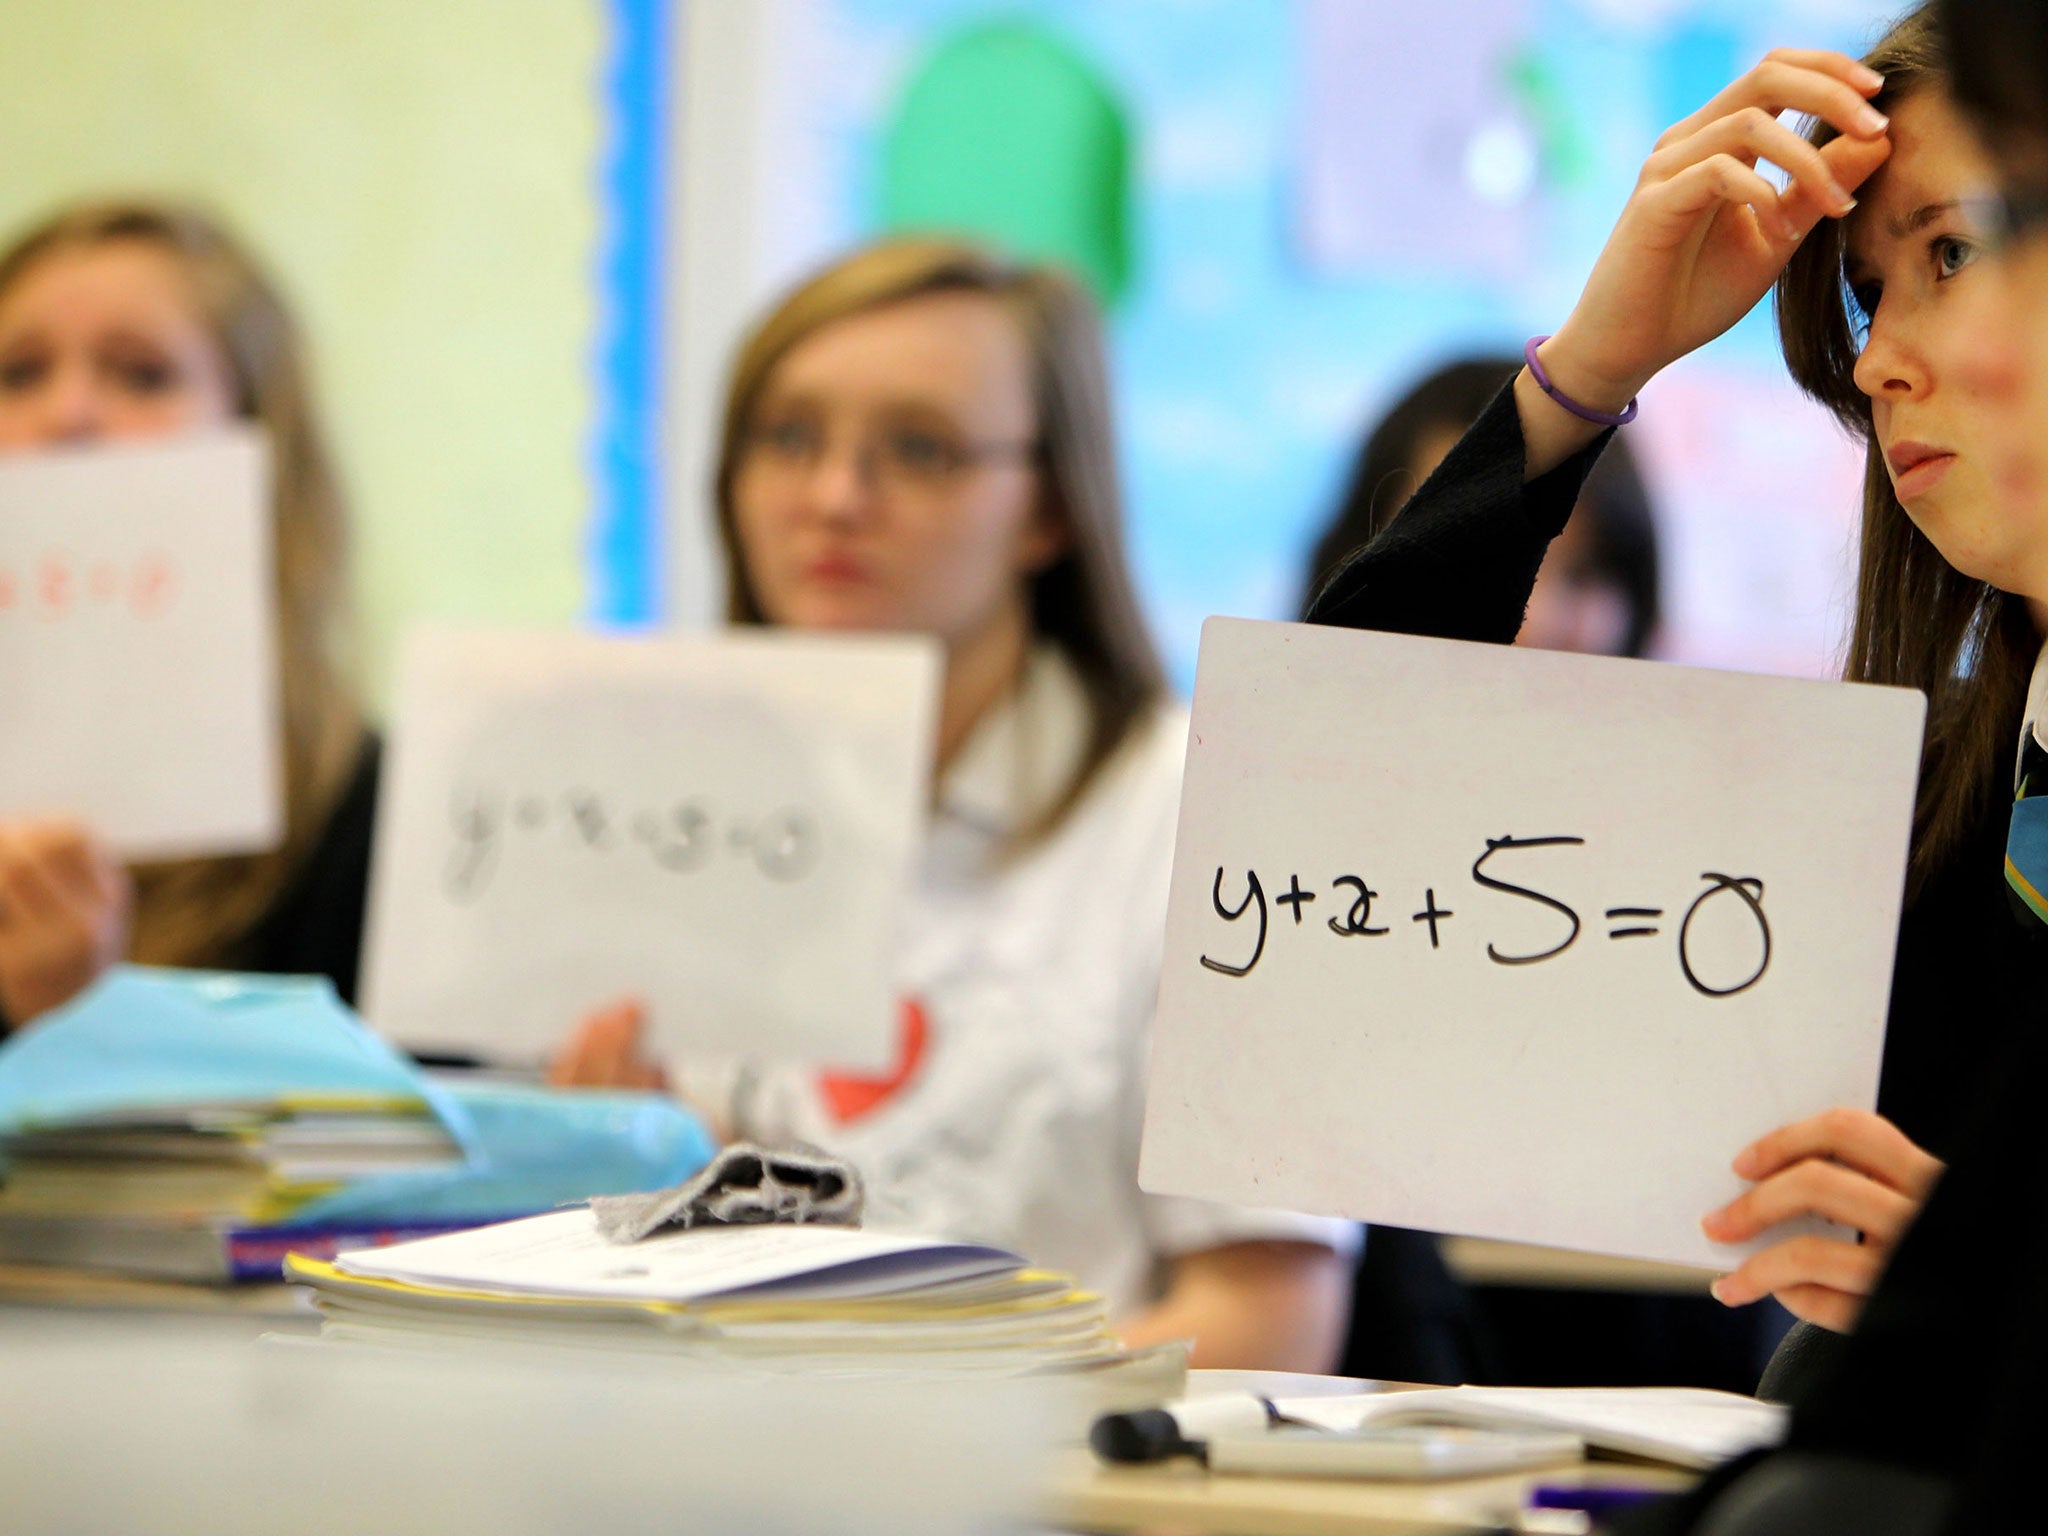 The National Numeracy charity wants maths to be seen as a vital life skill